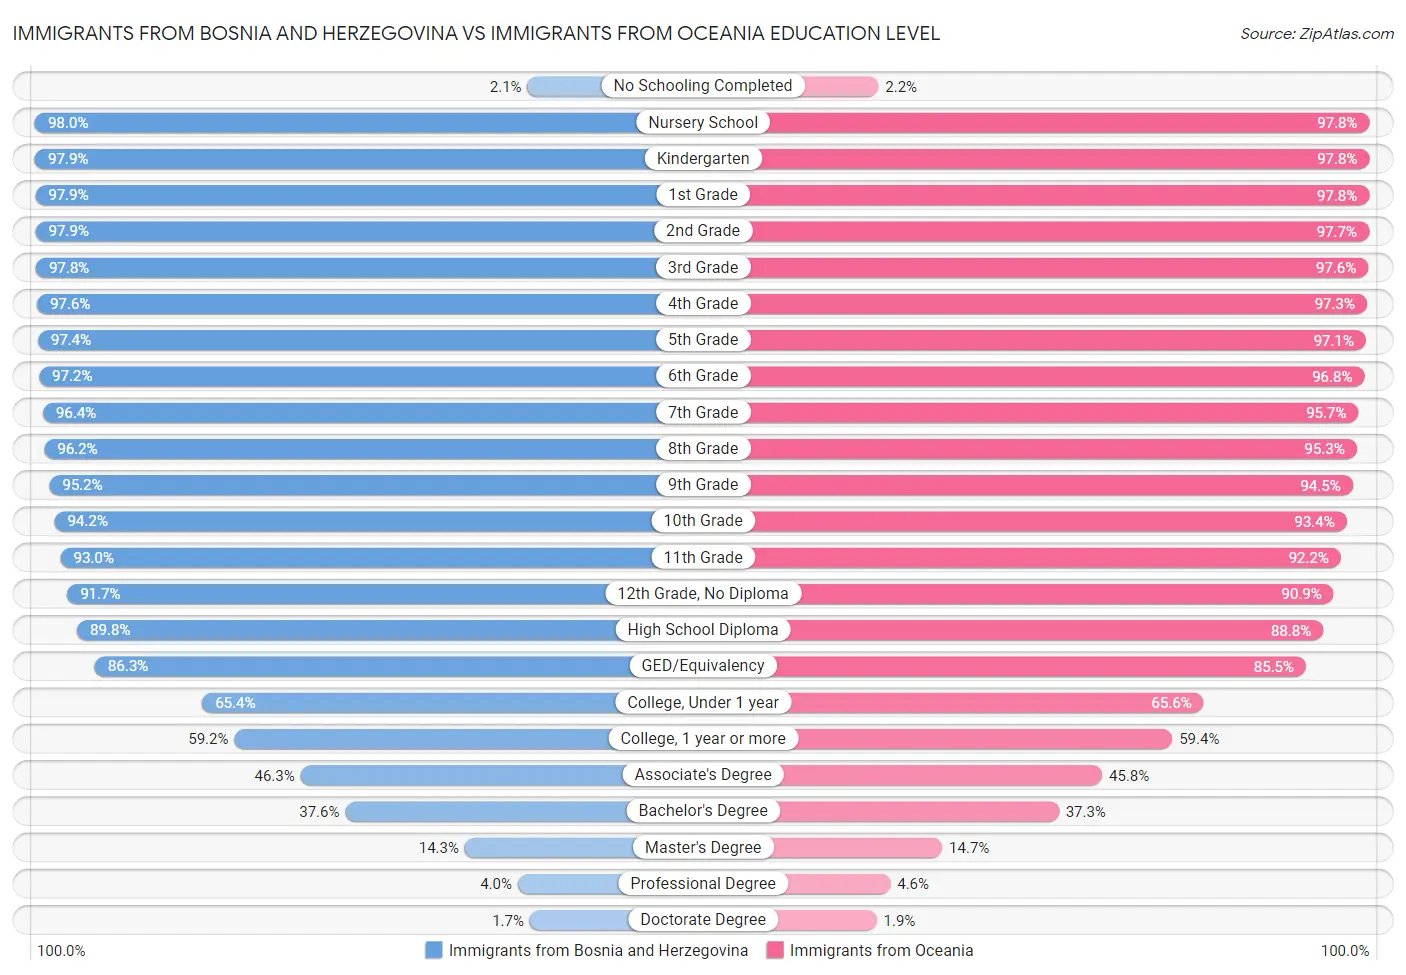 Immigrants from Bosnia and Herzegovina vs Immigrants from Oceania Education Level